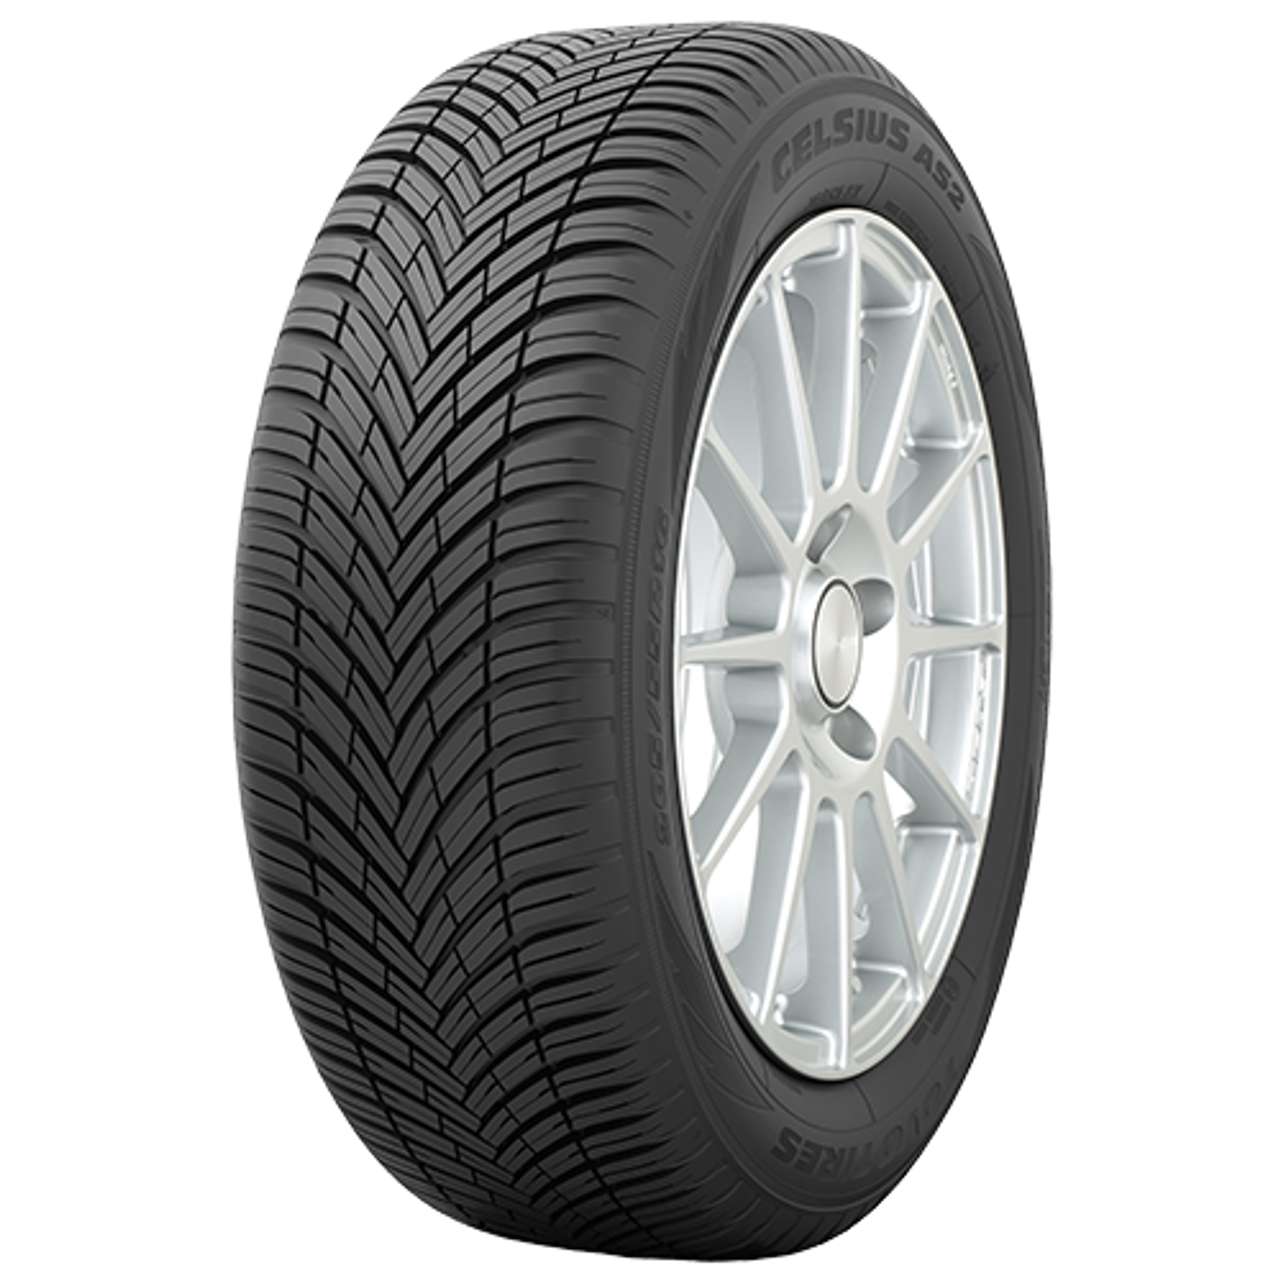 TOYO CELSIUS AS2 215/55R16 93V BSW